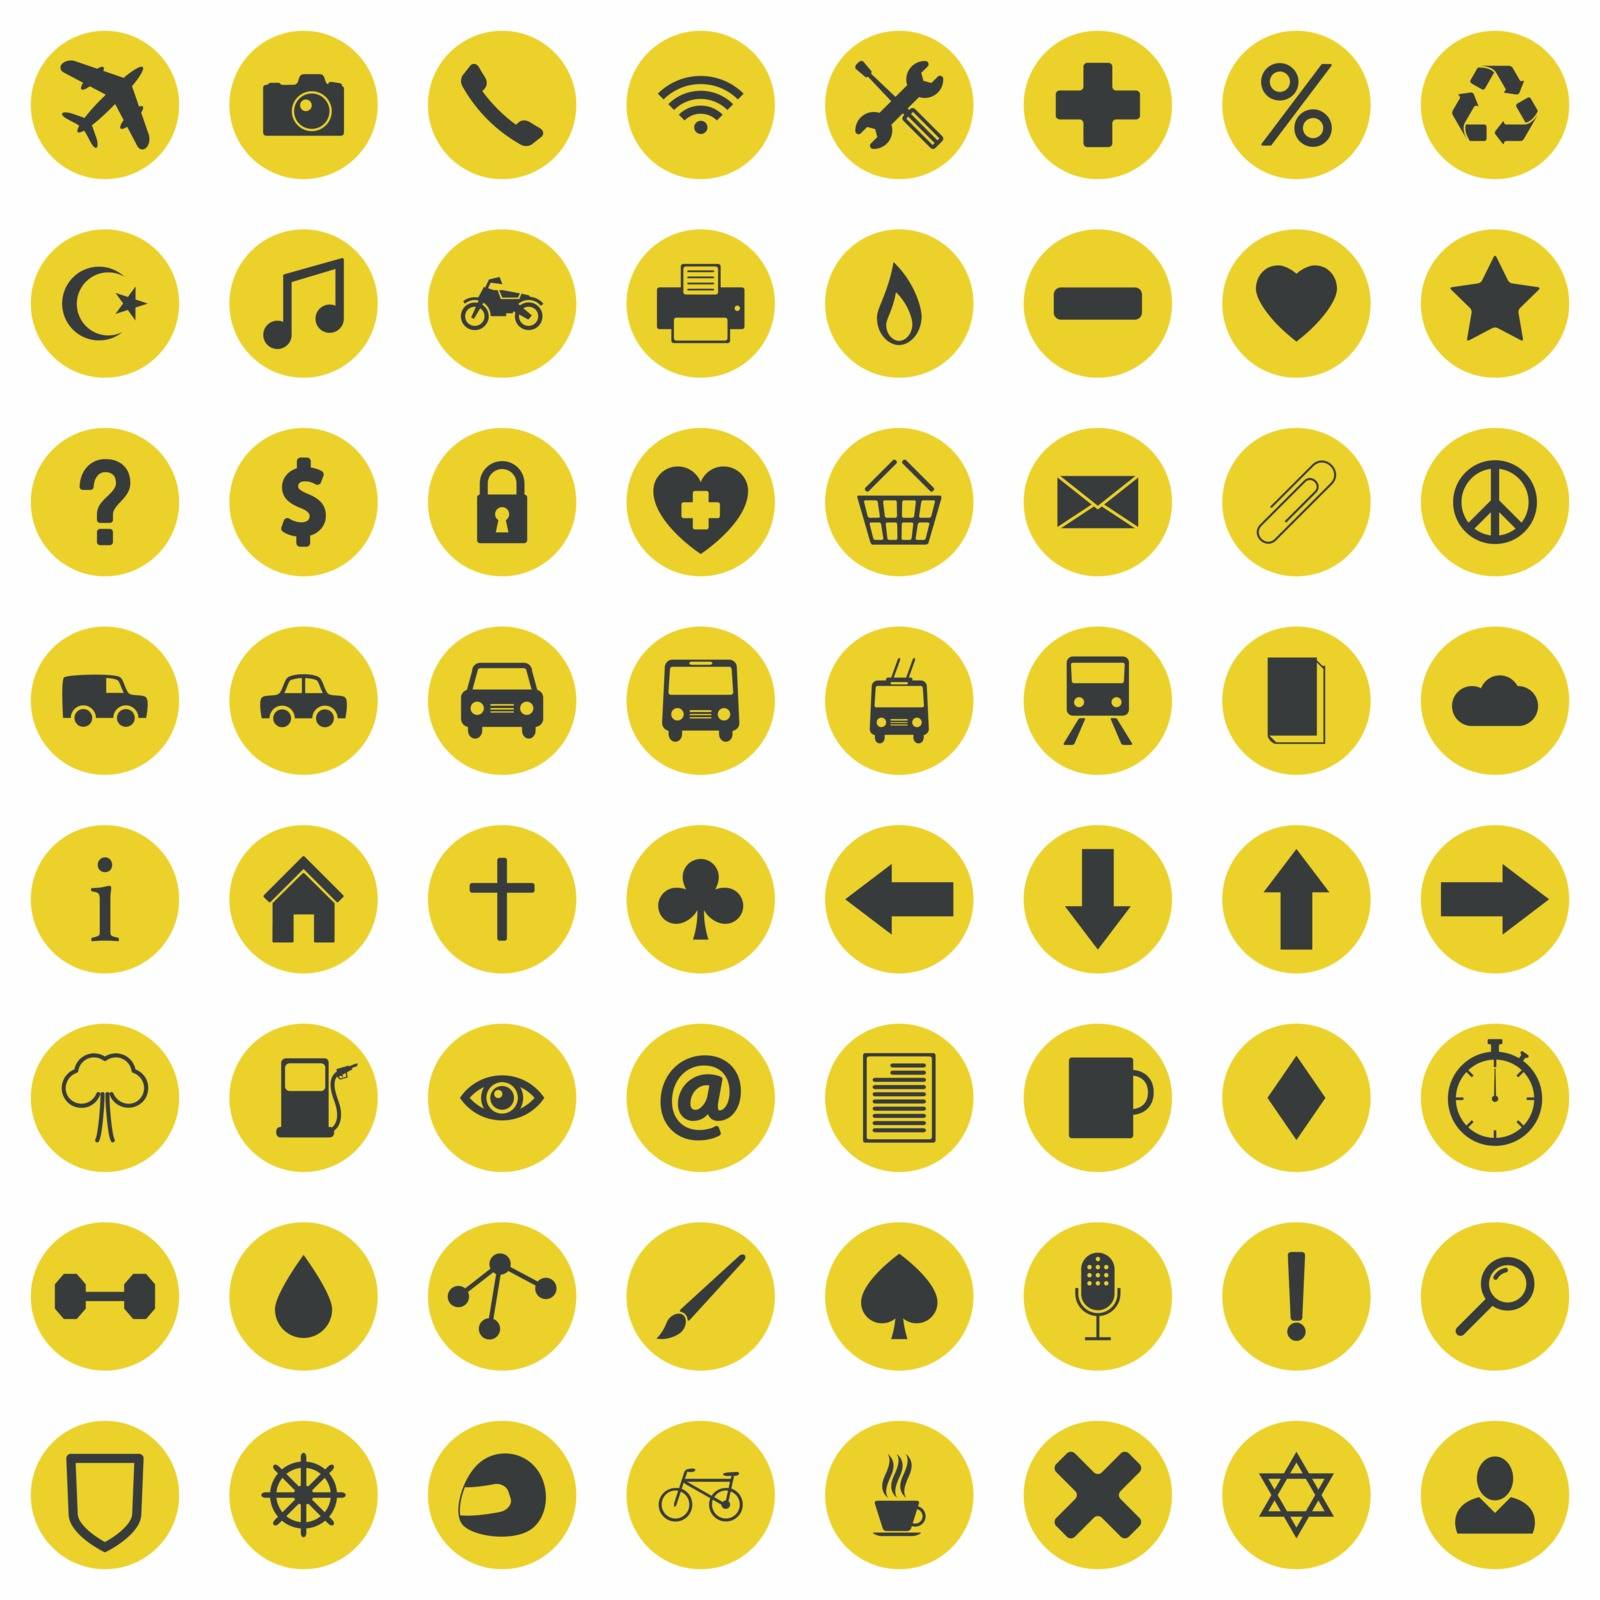 Set of clean yellow flat web icons and glyphs in circles